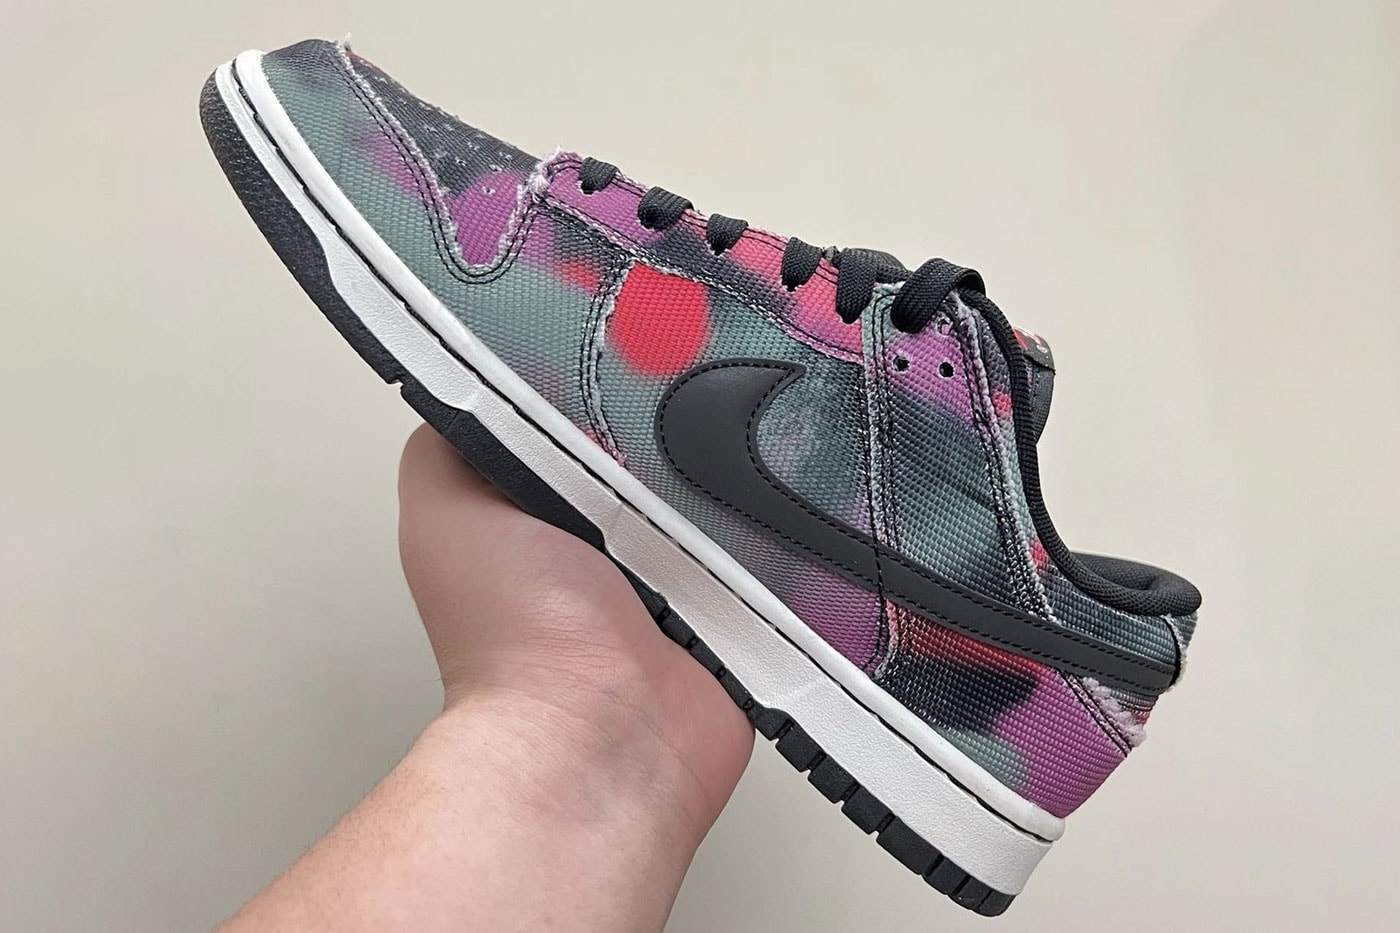 Nike Dunk Low Graffiti swoosh red pink purple black white gray green frayed edge graphics release info first look images